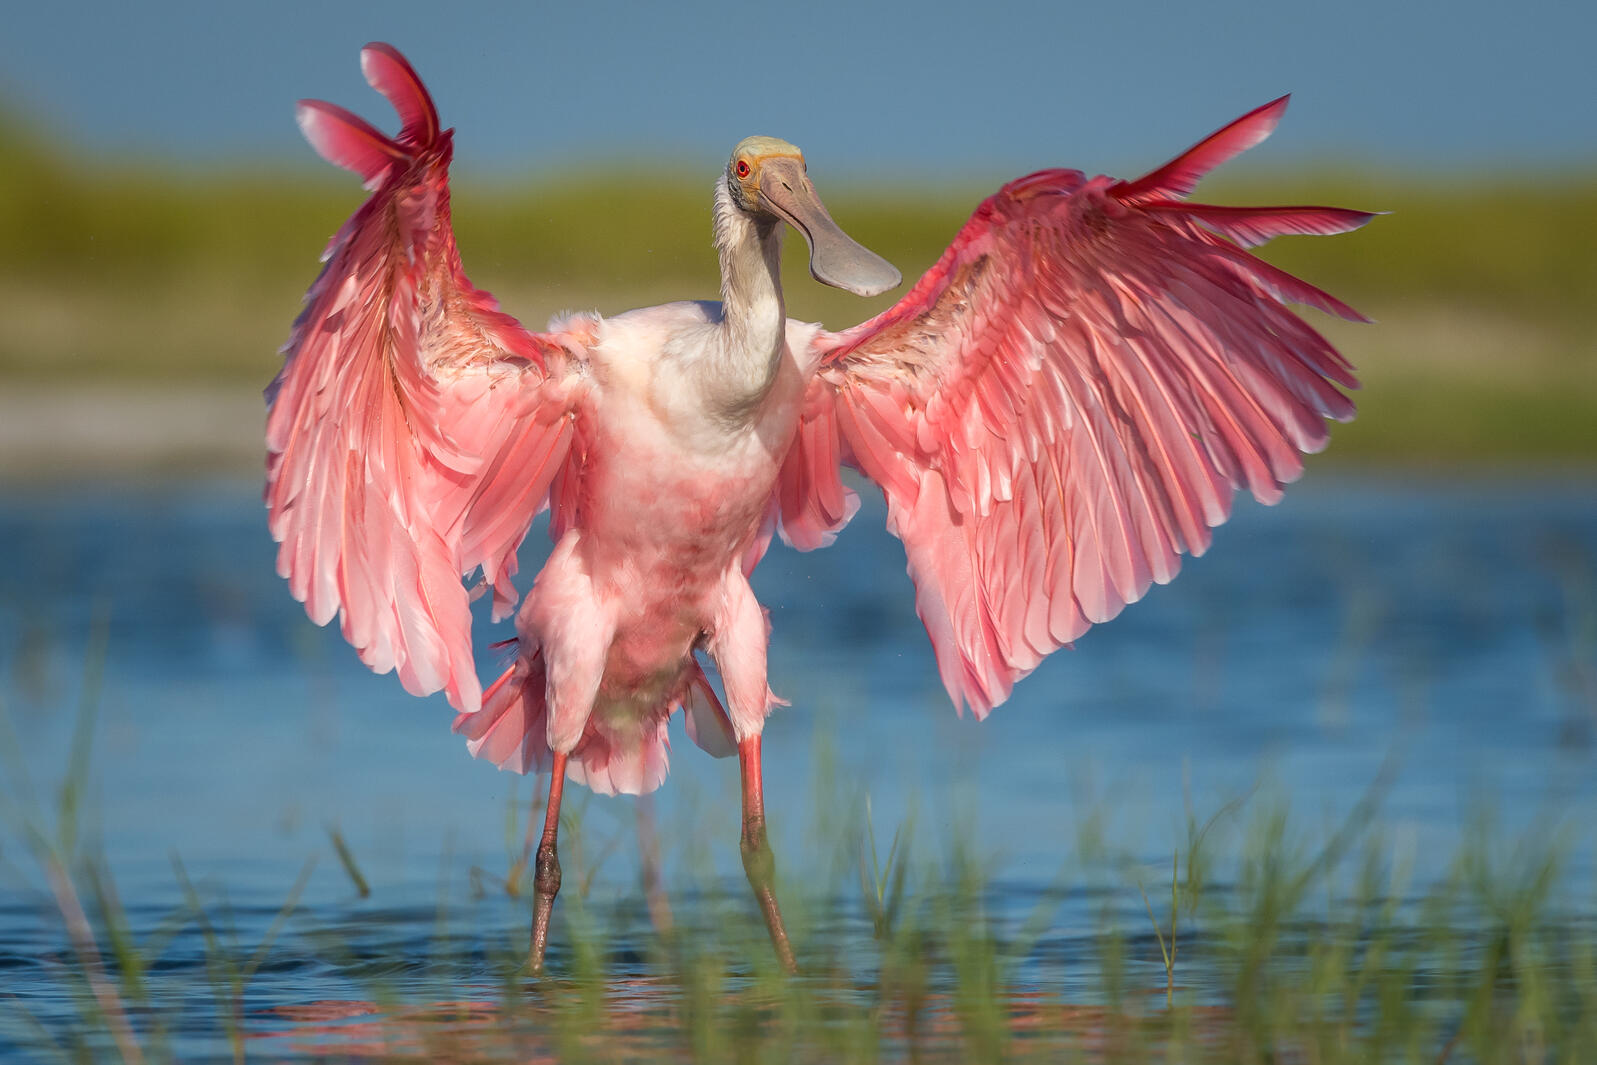 Roseate Spoonbill with wings outstretched